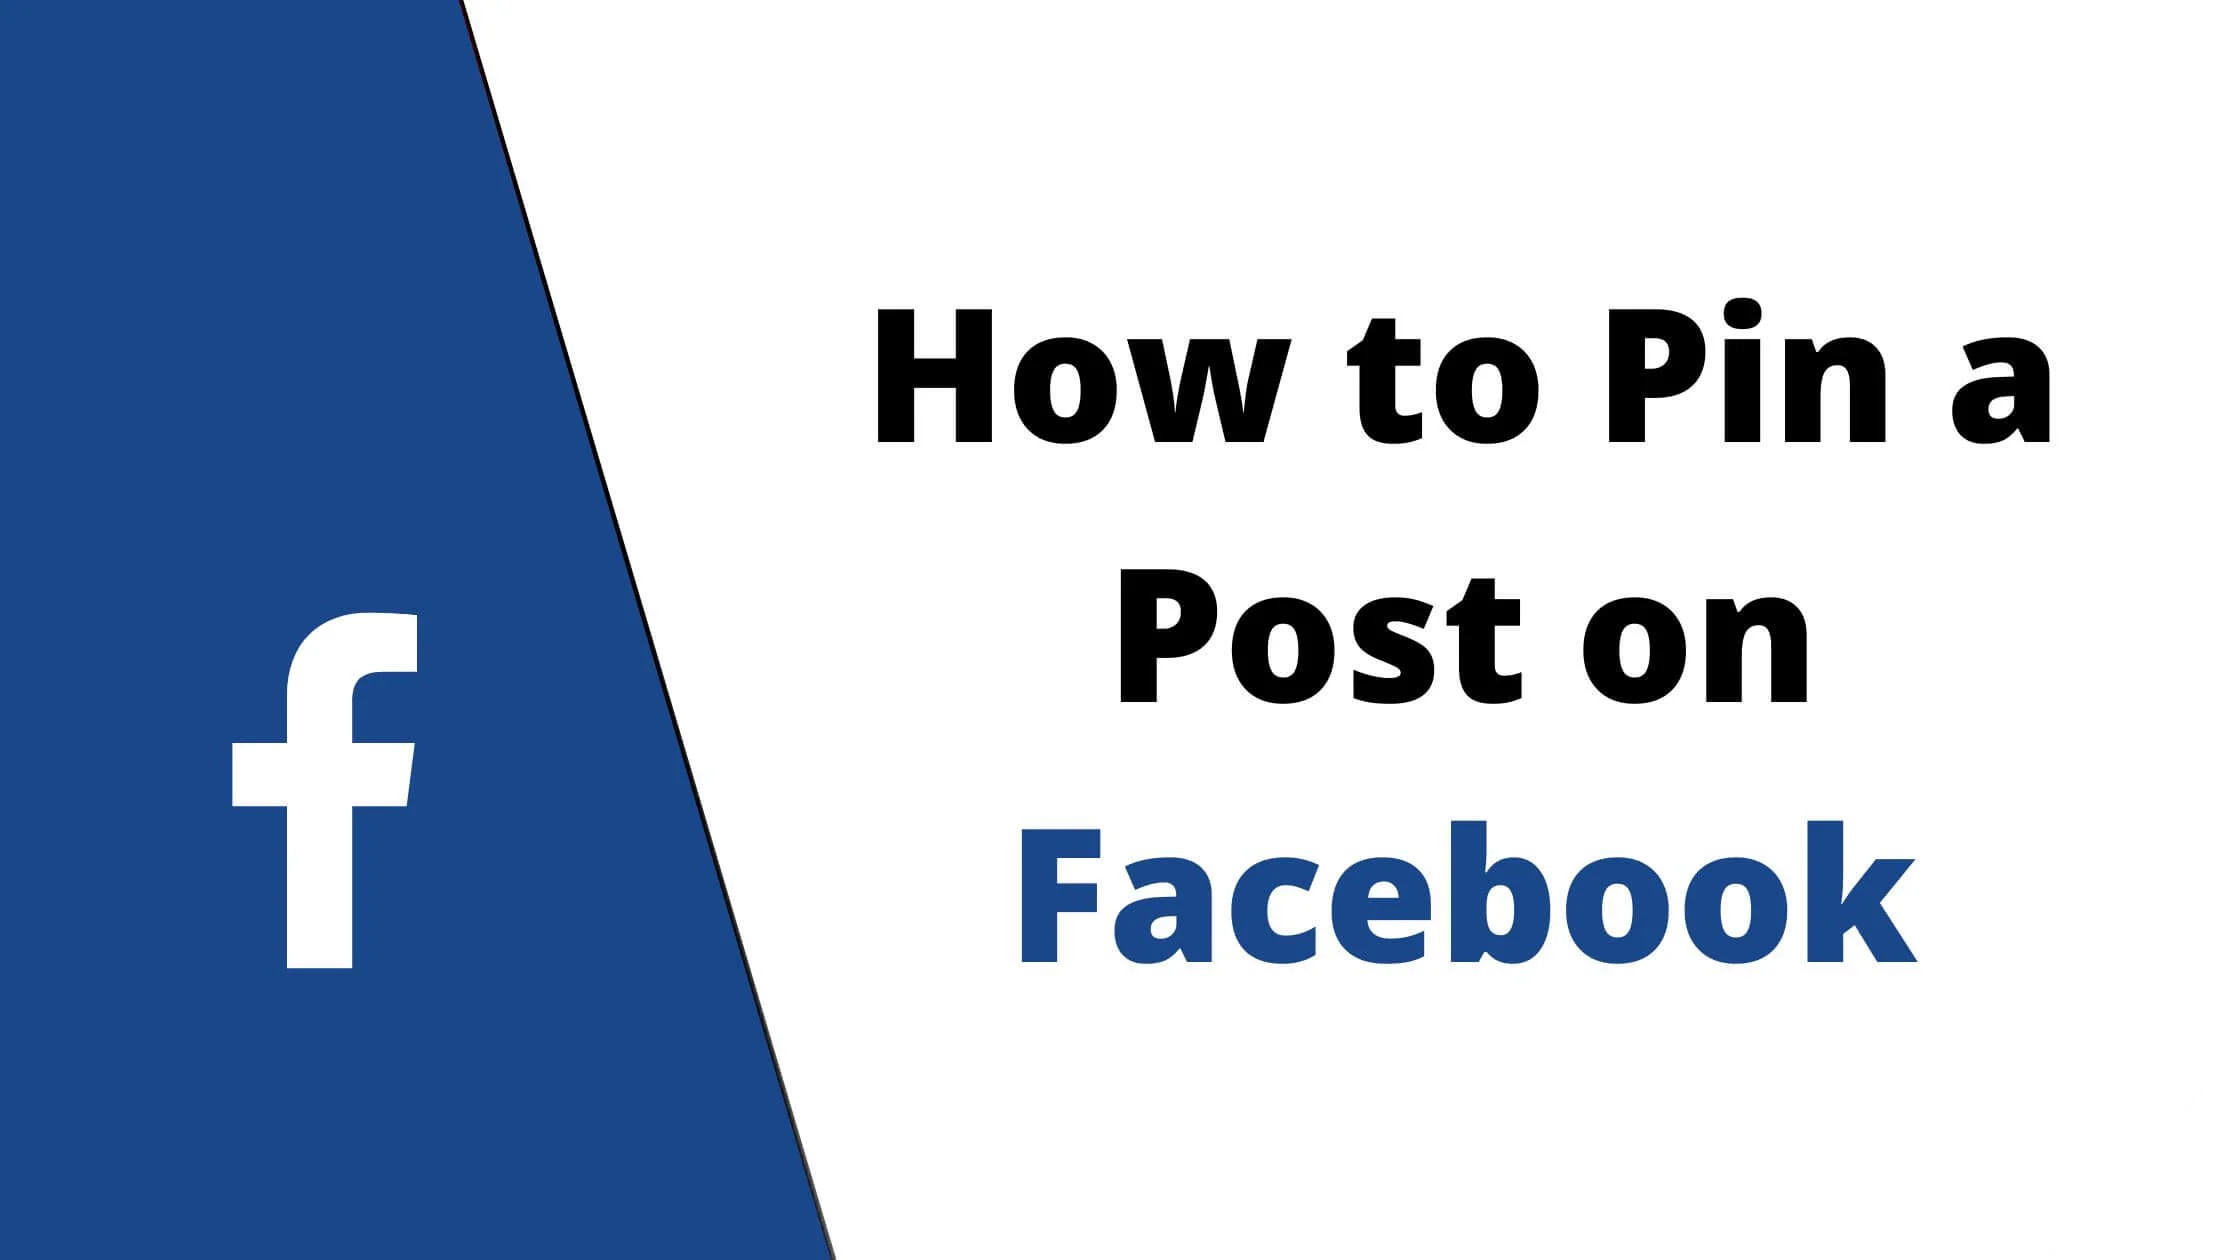 Pin a Post on Facebook